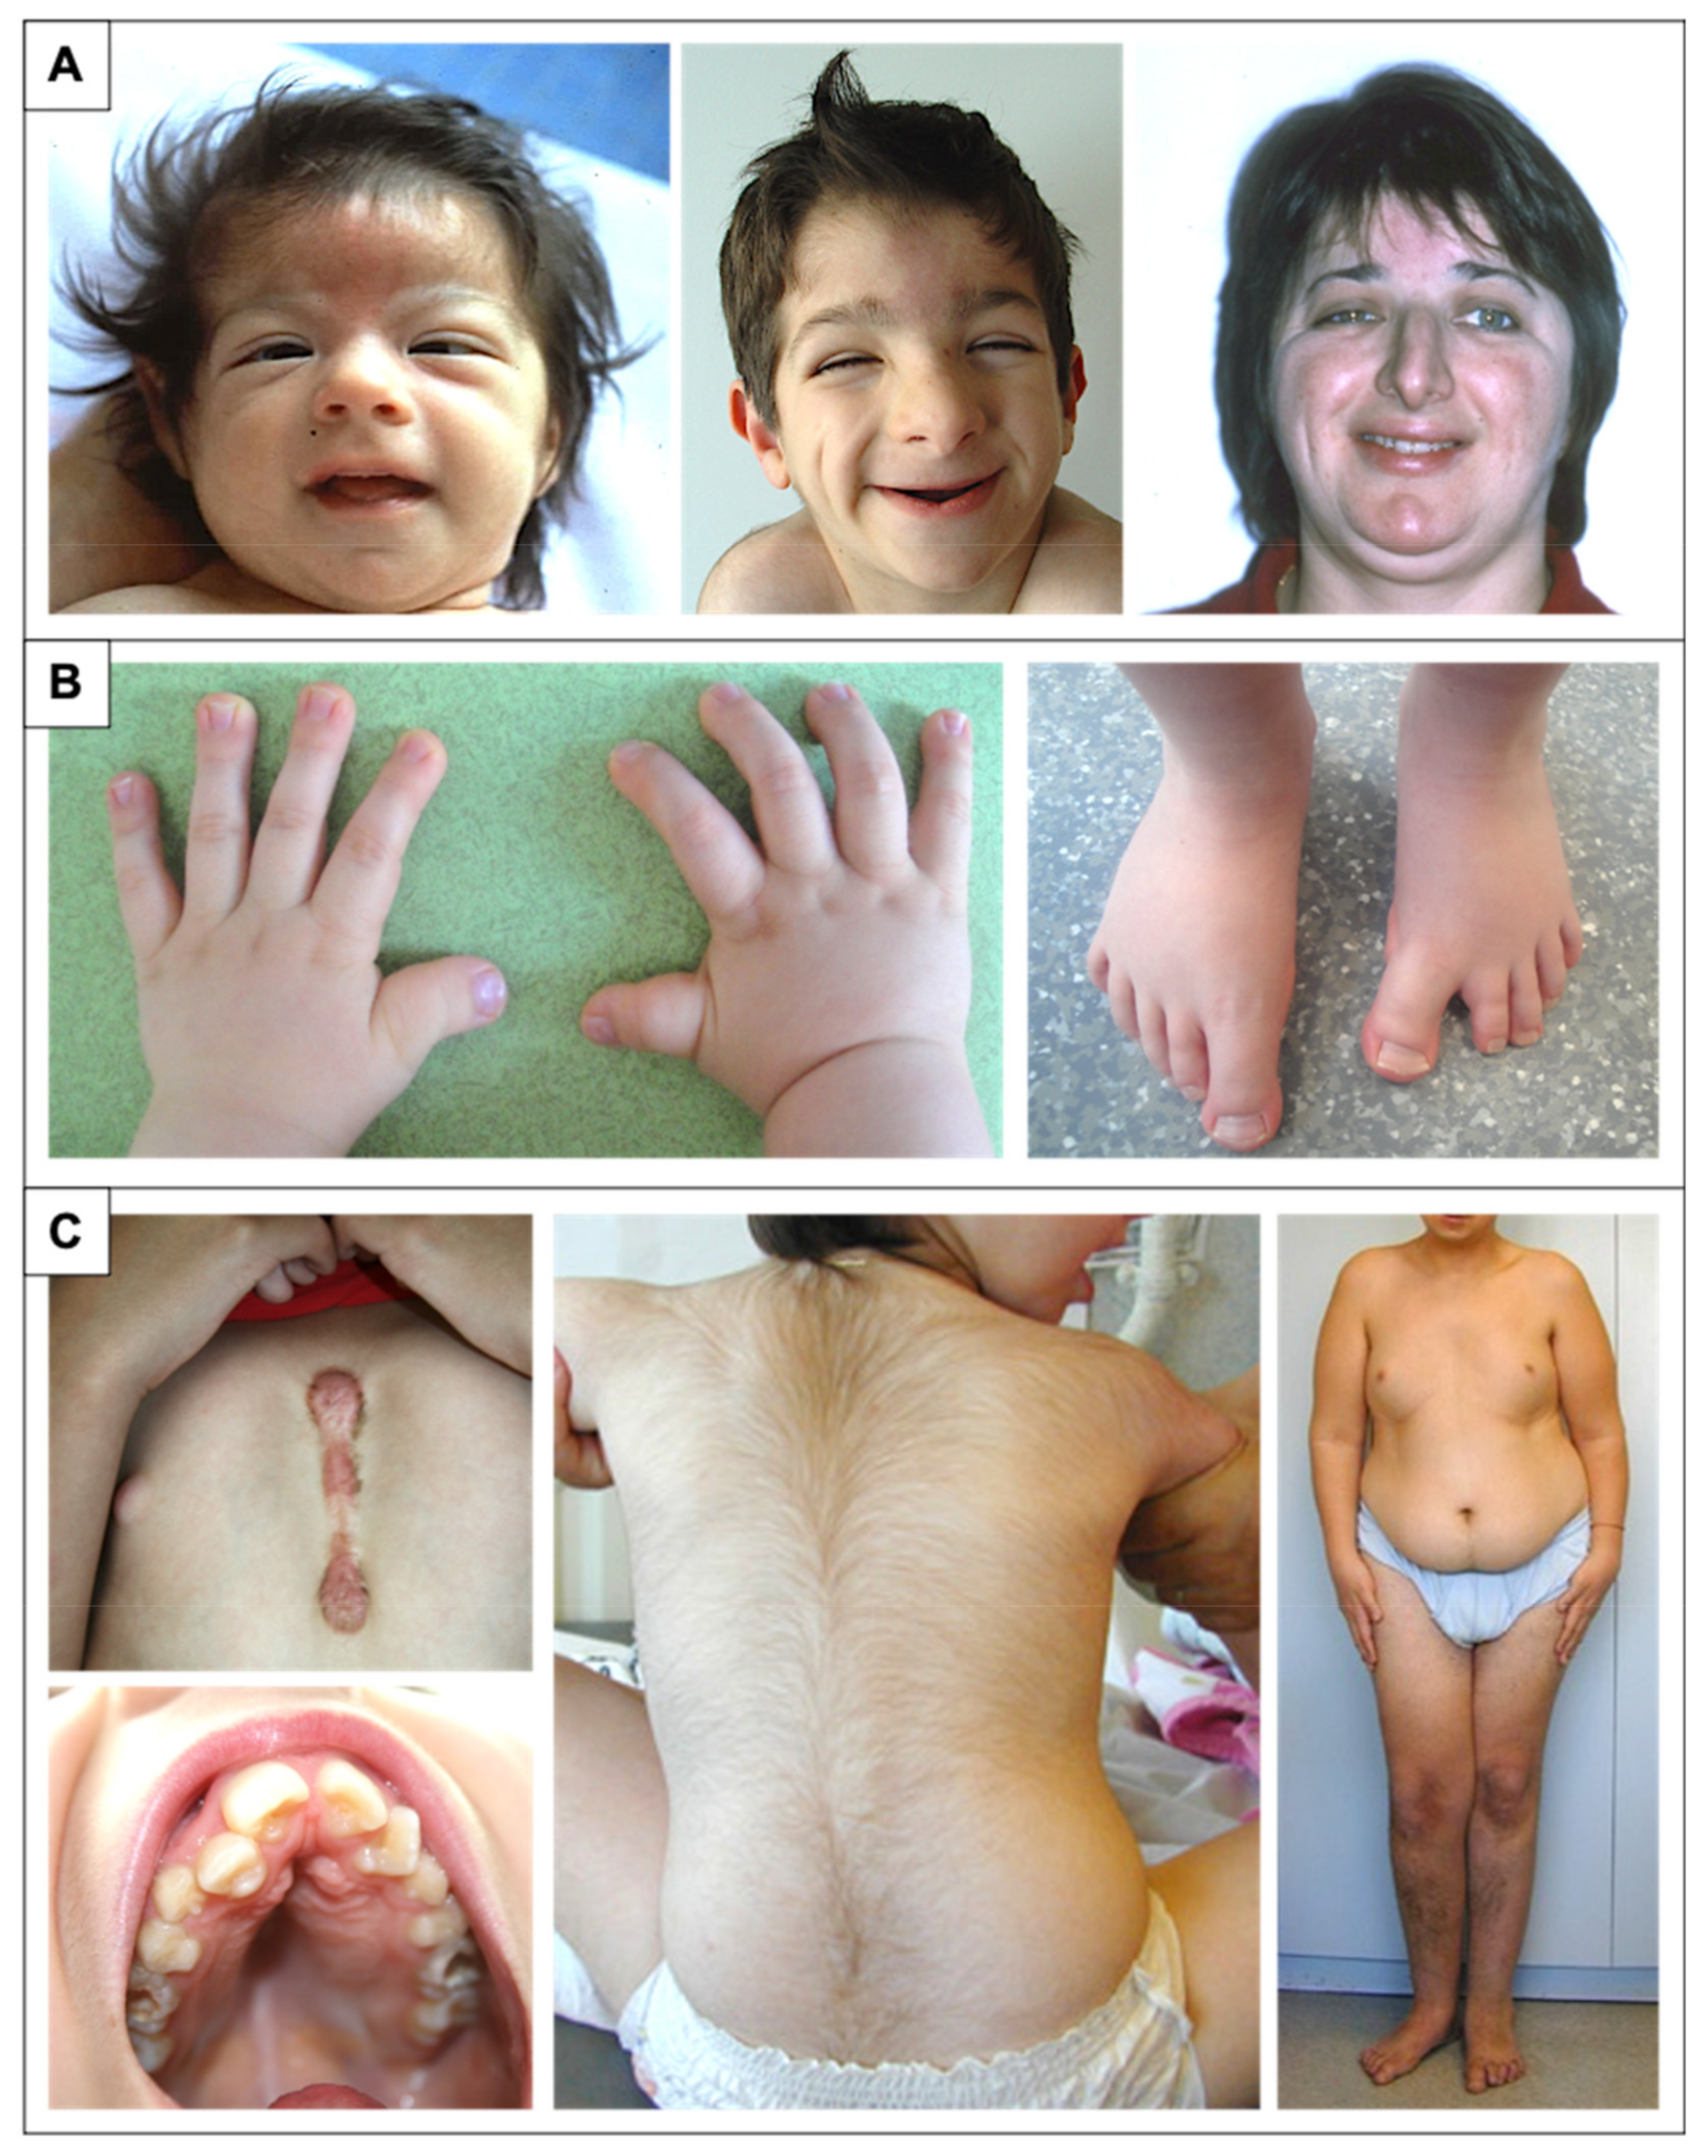 Rubinstein Taybi Syndrome in an Indian Child due to EP300 Gene